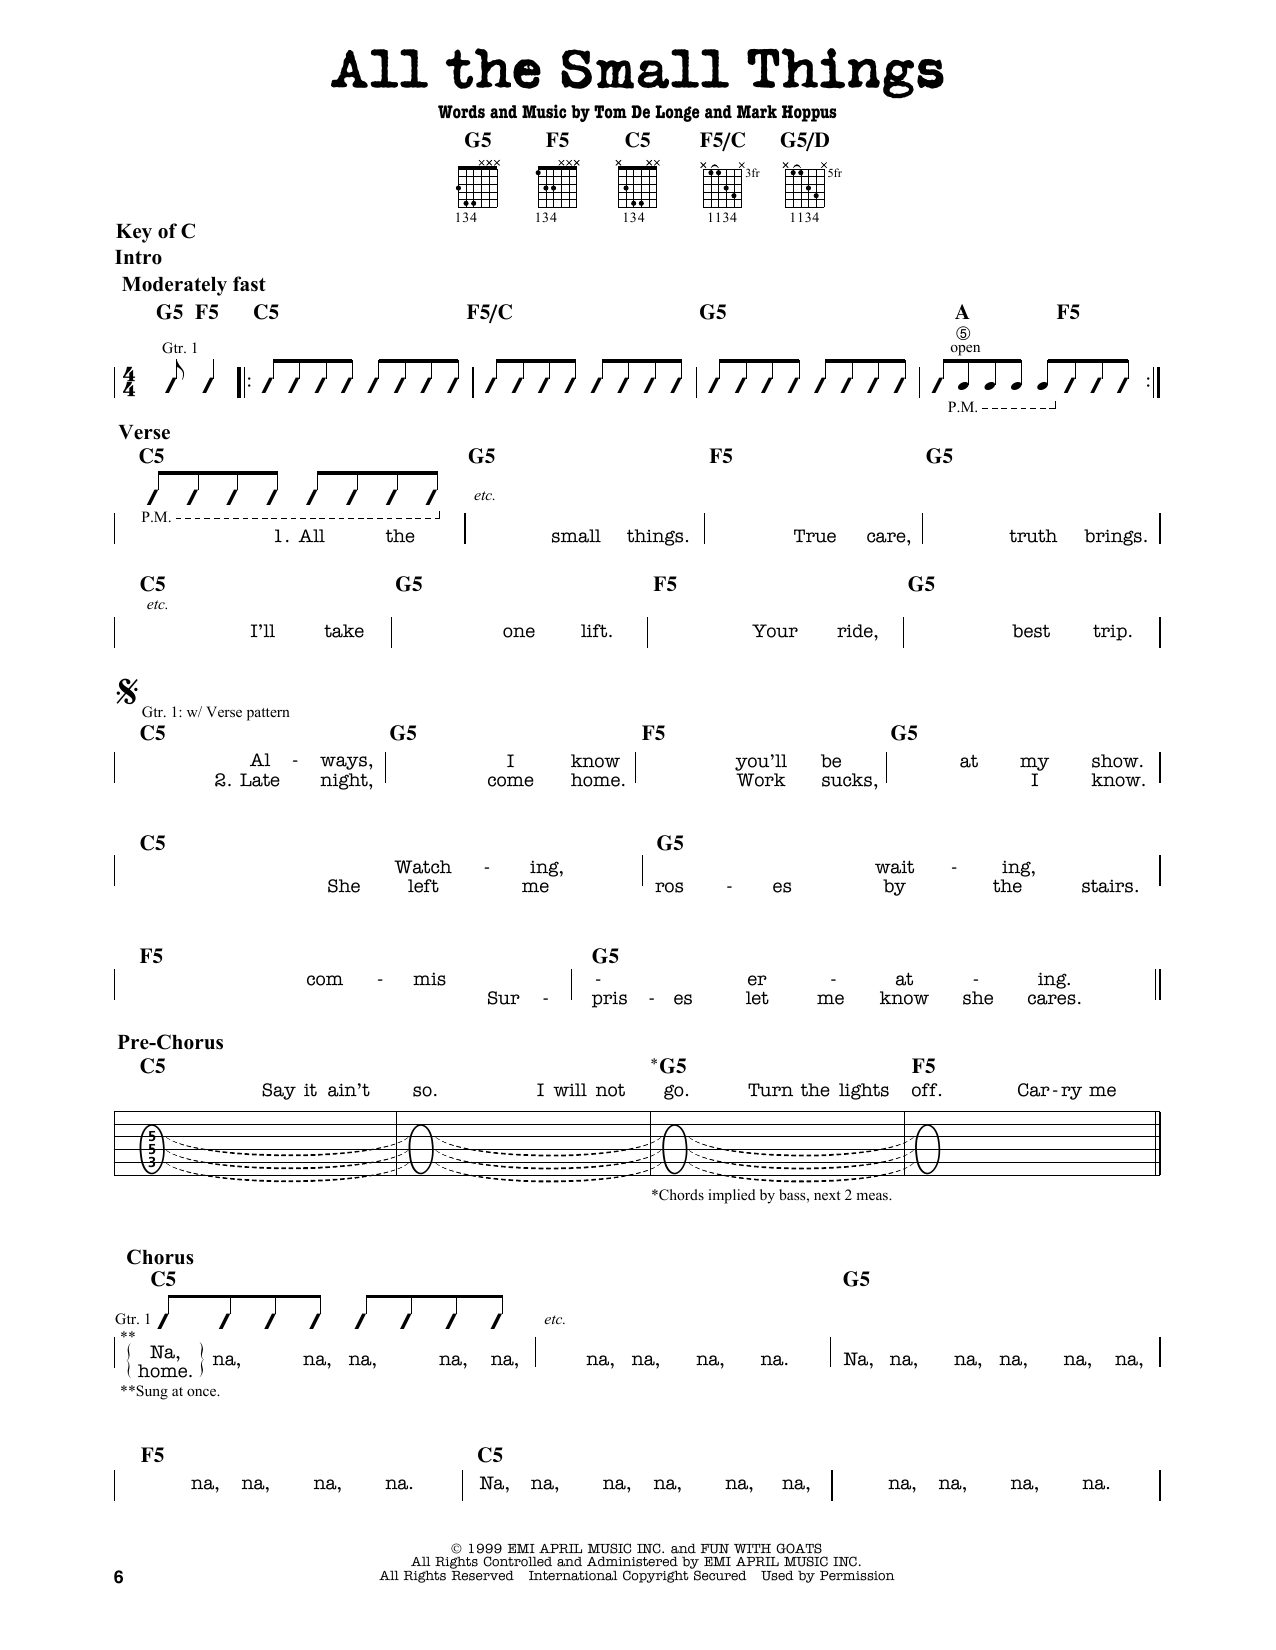 Download Blink 182 All The Small Things Sheet Music